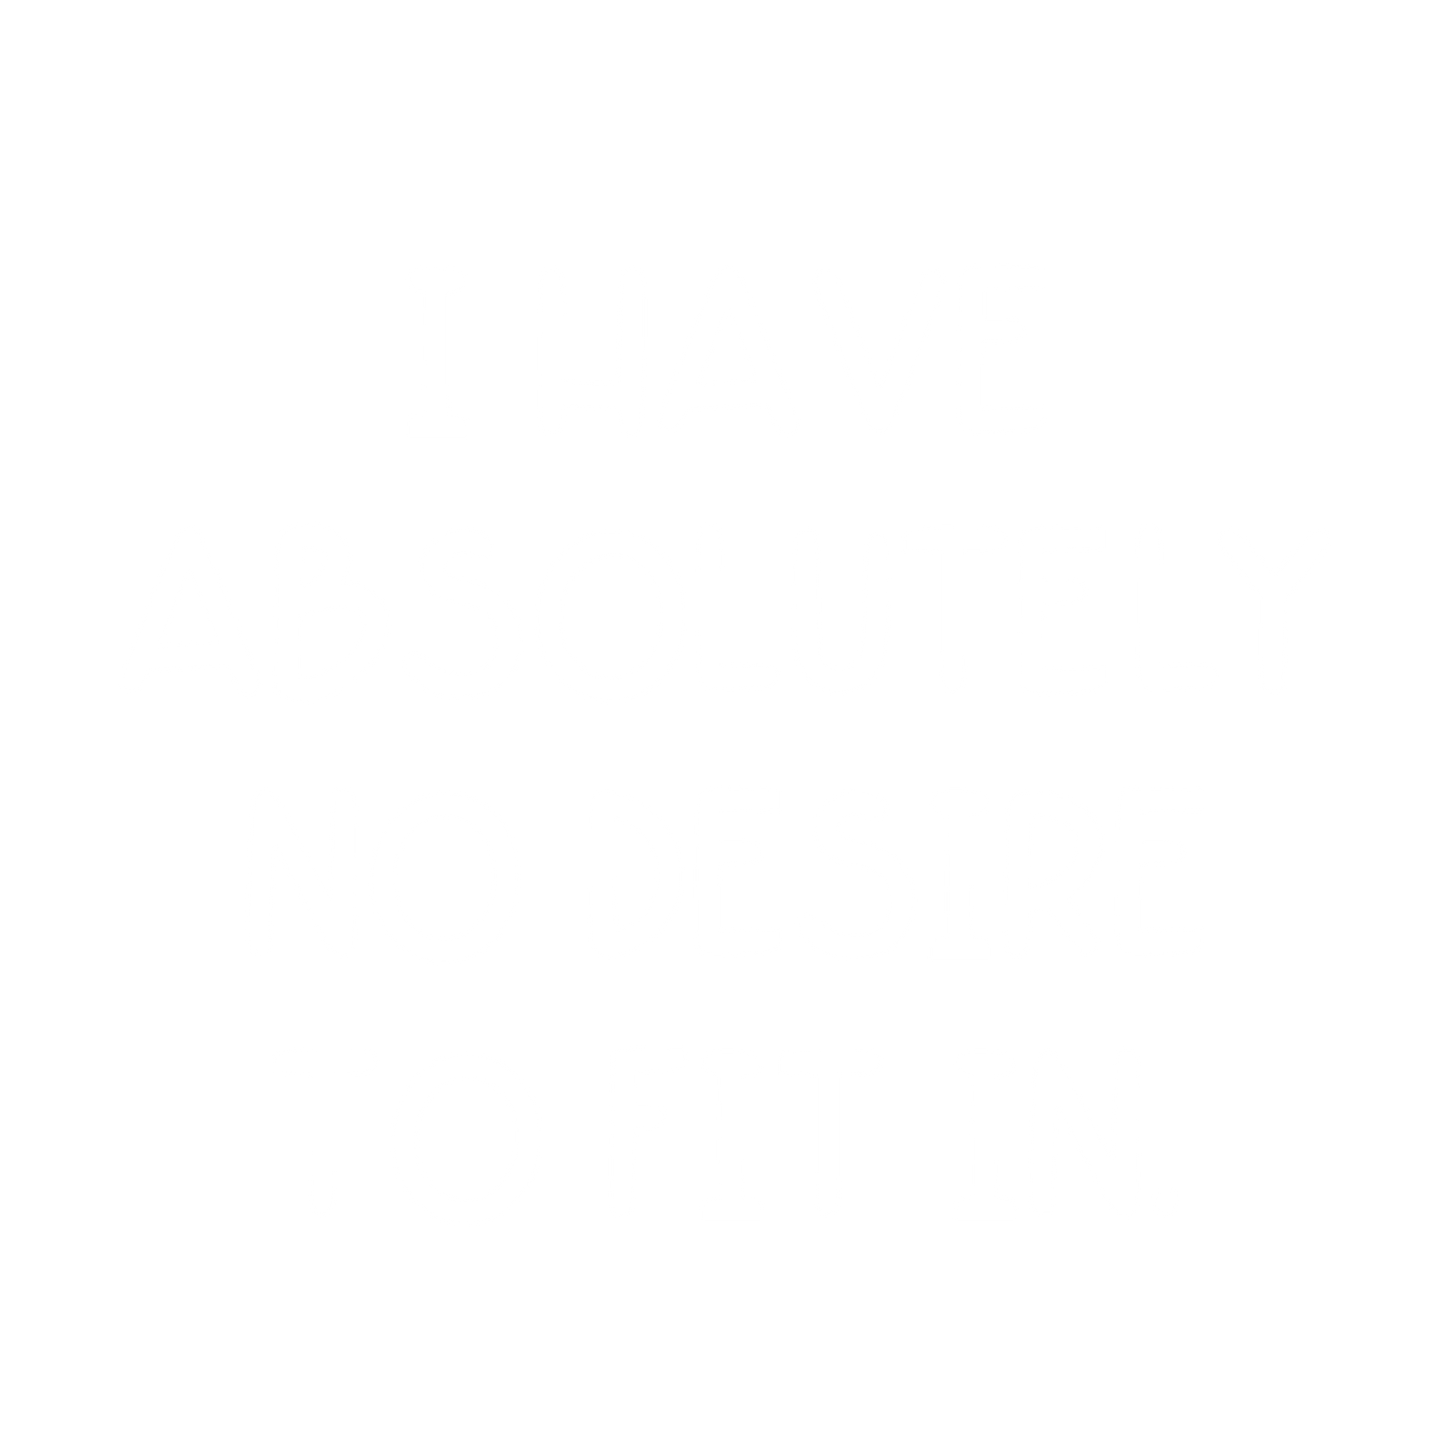 I Have Absolutely No Desire to Fit in.